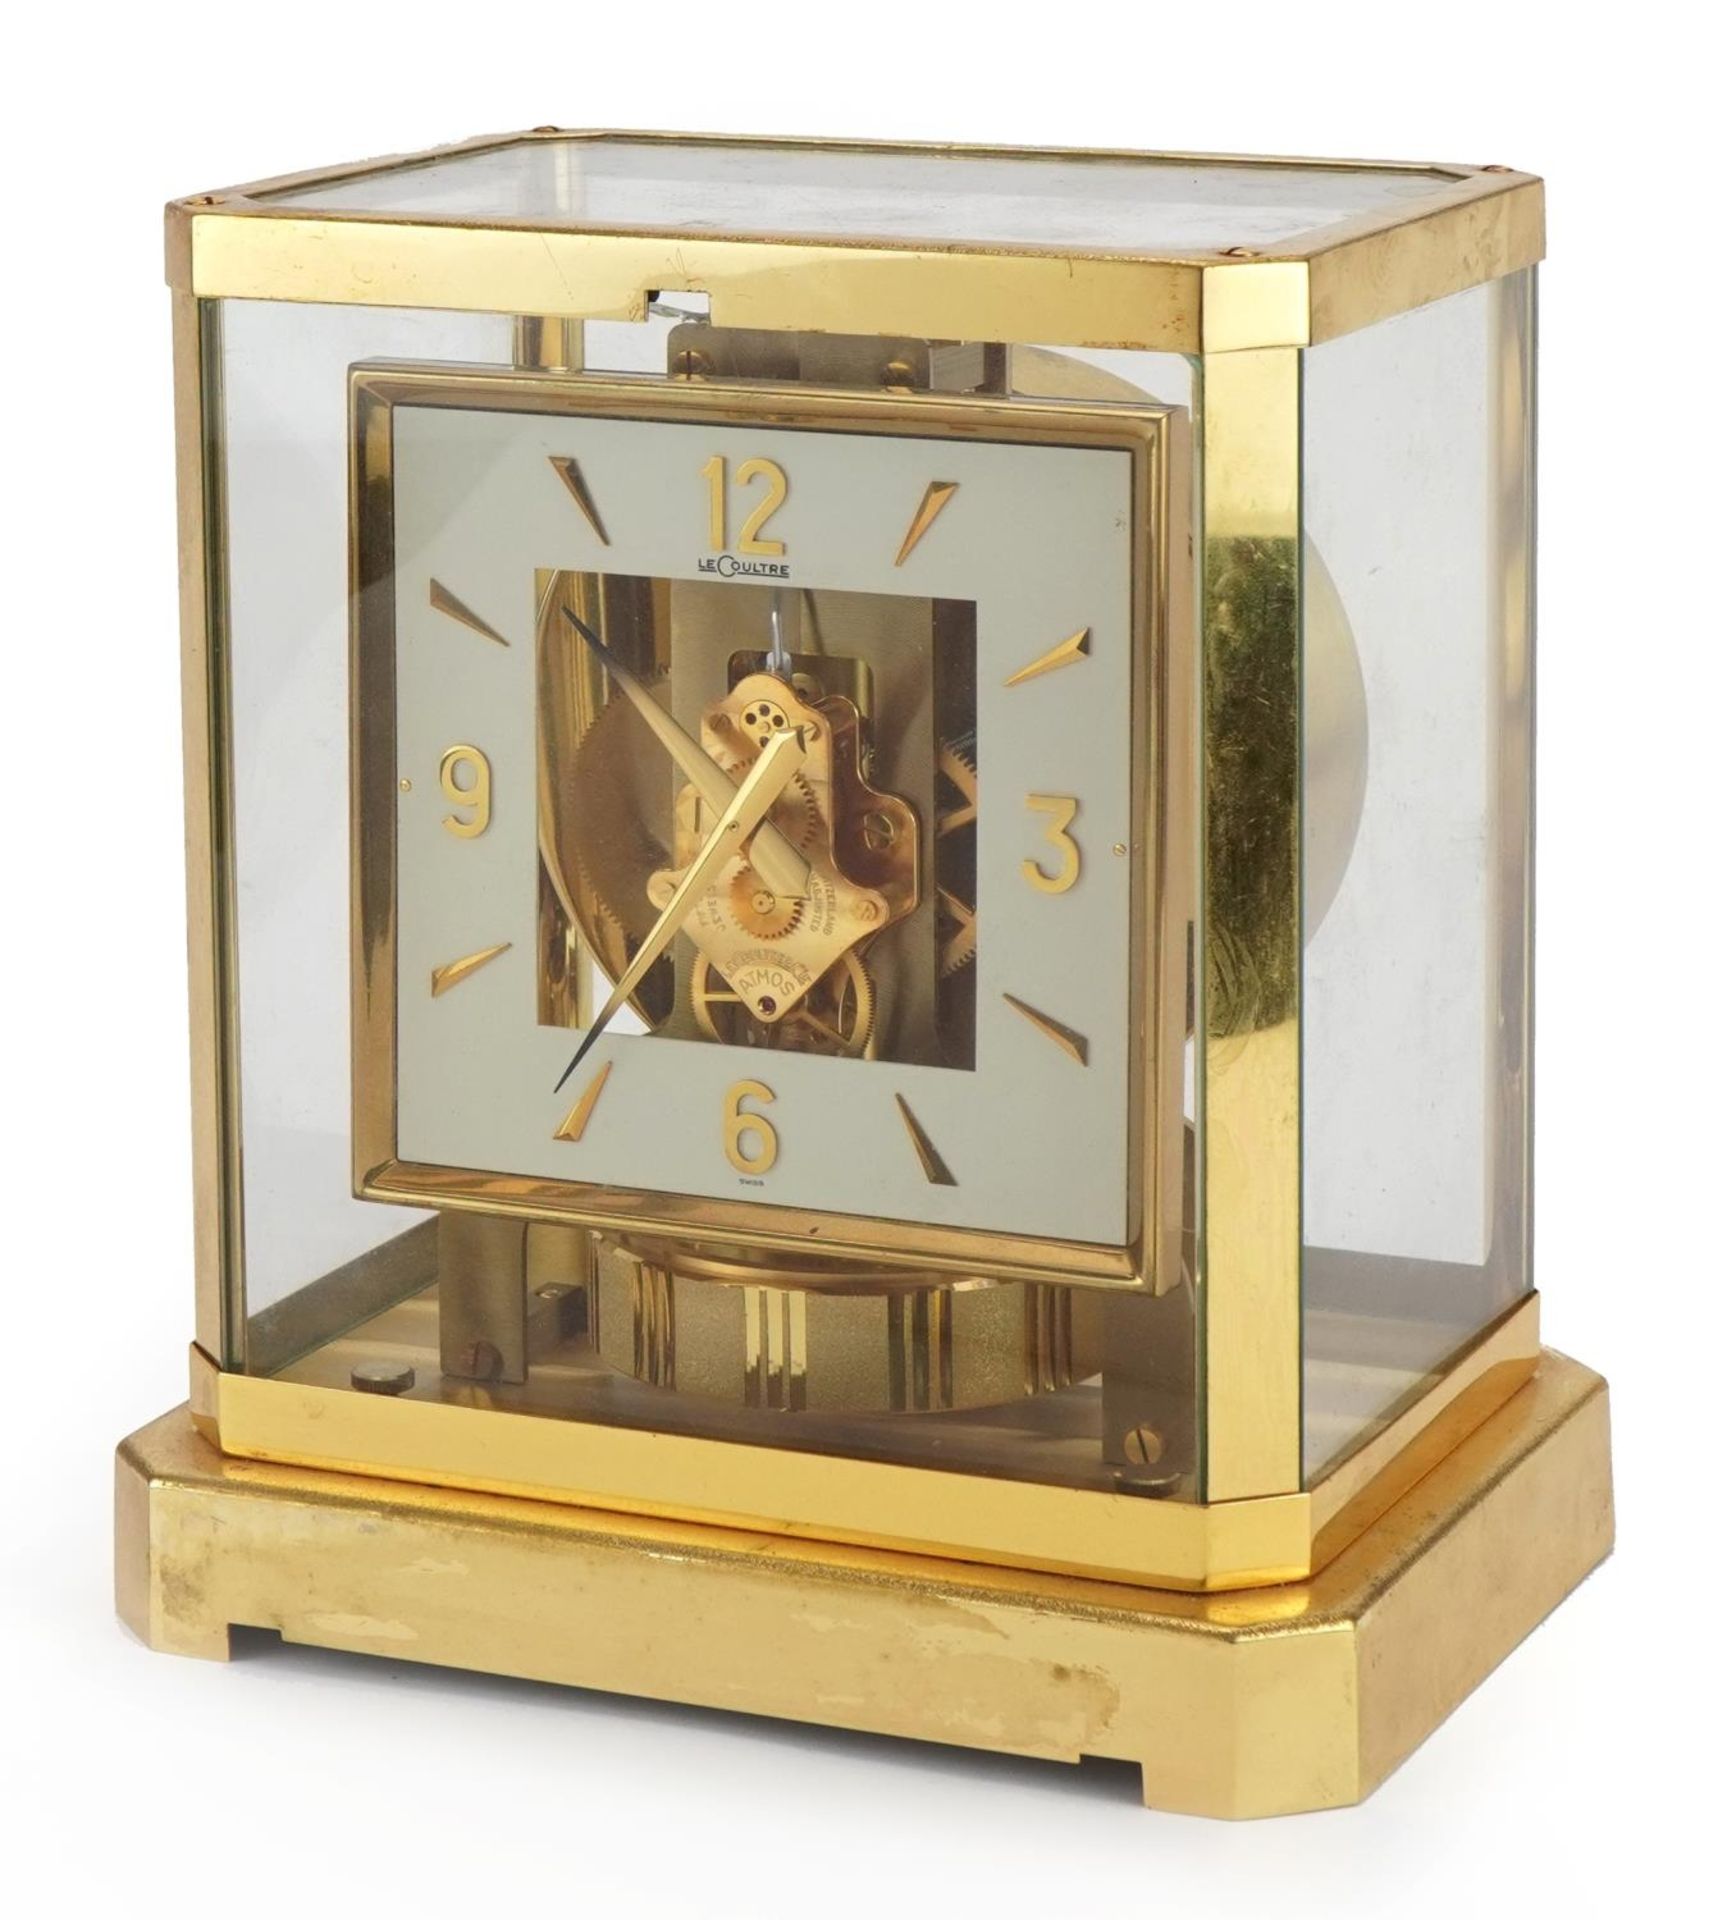 Jaeger LeCoultre brass cased Atmos clock, the square chapter ring having Arabic numerals, serial